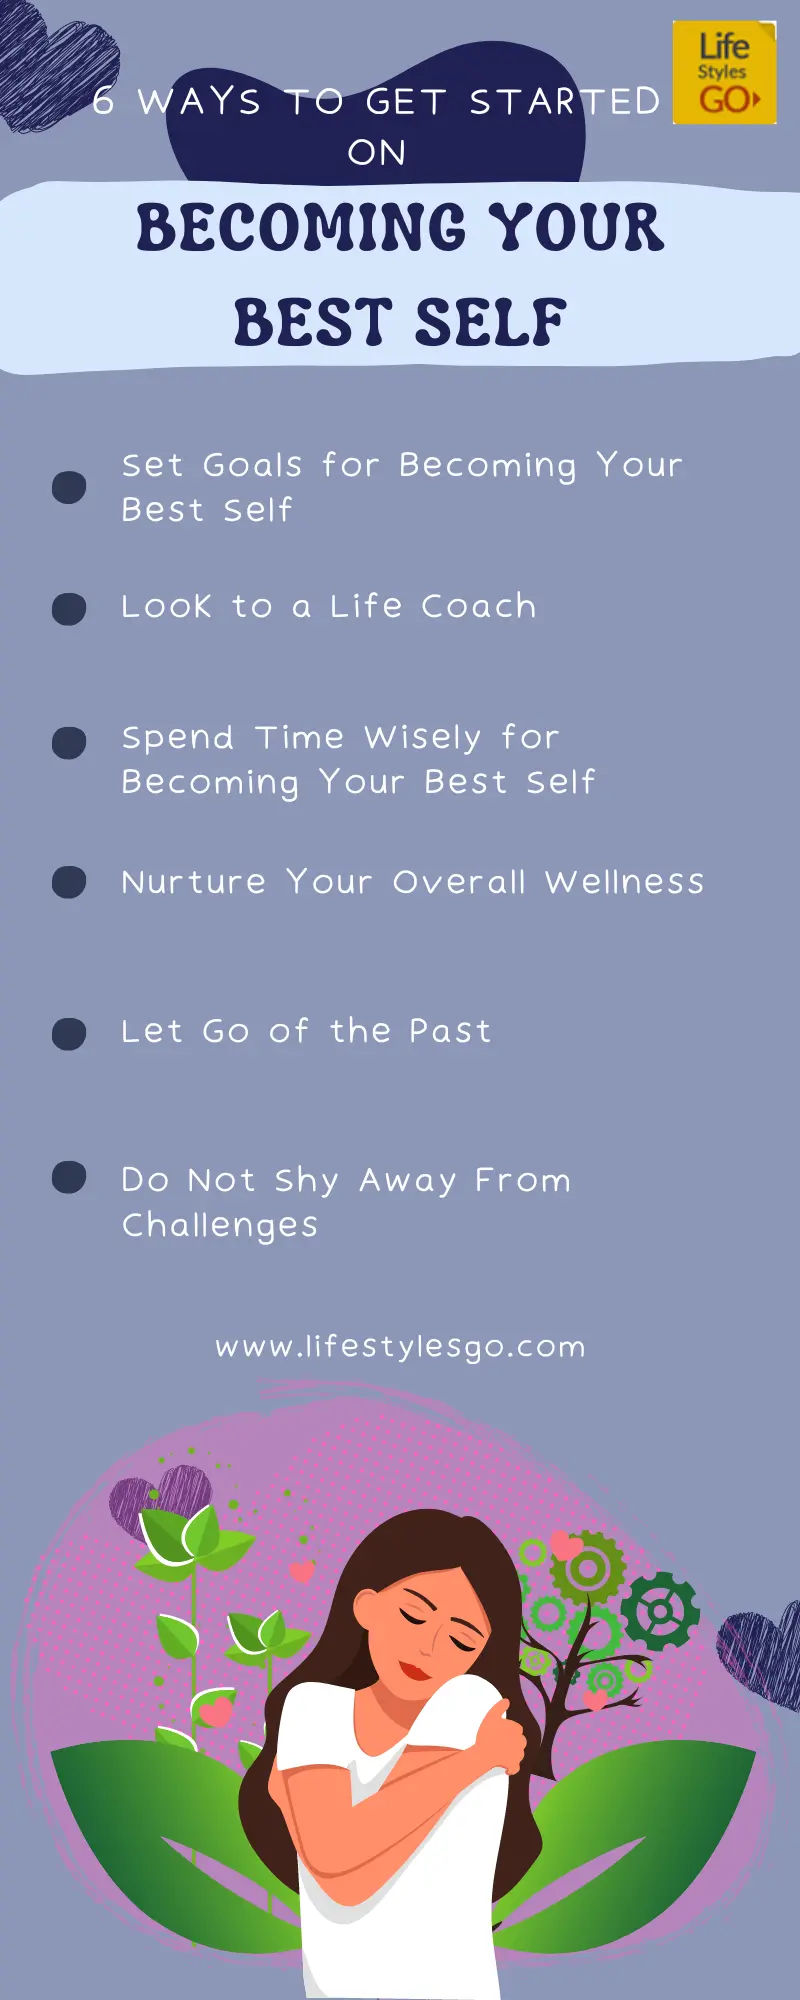 Get started on becoming your best self Infographic